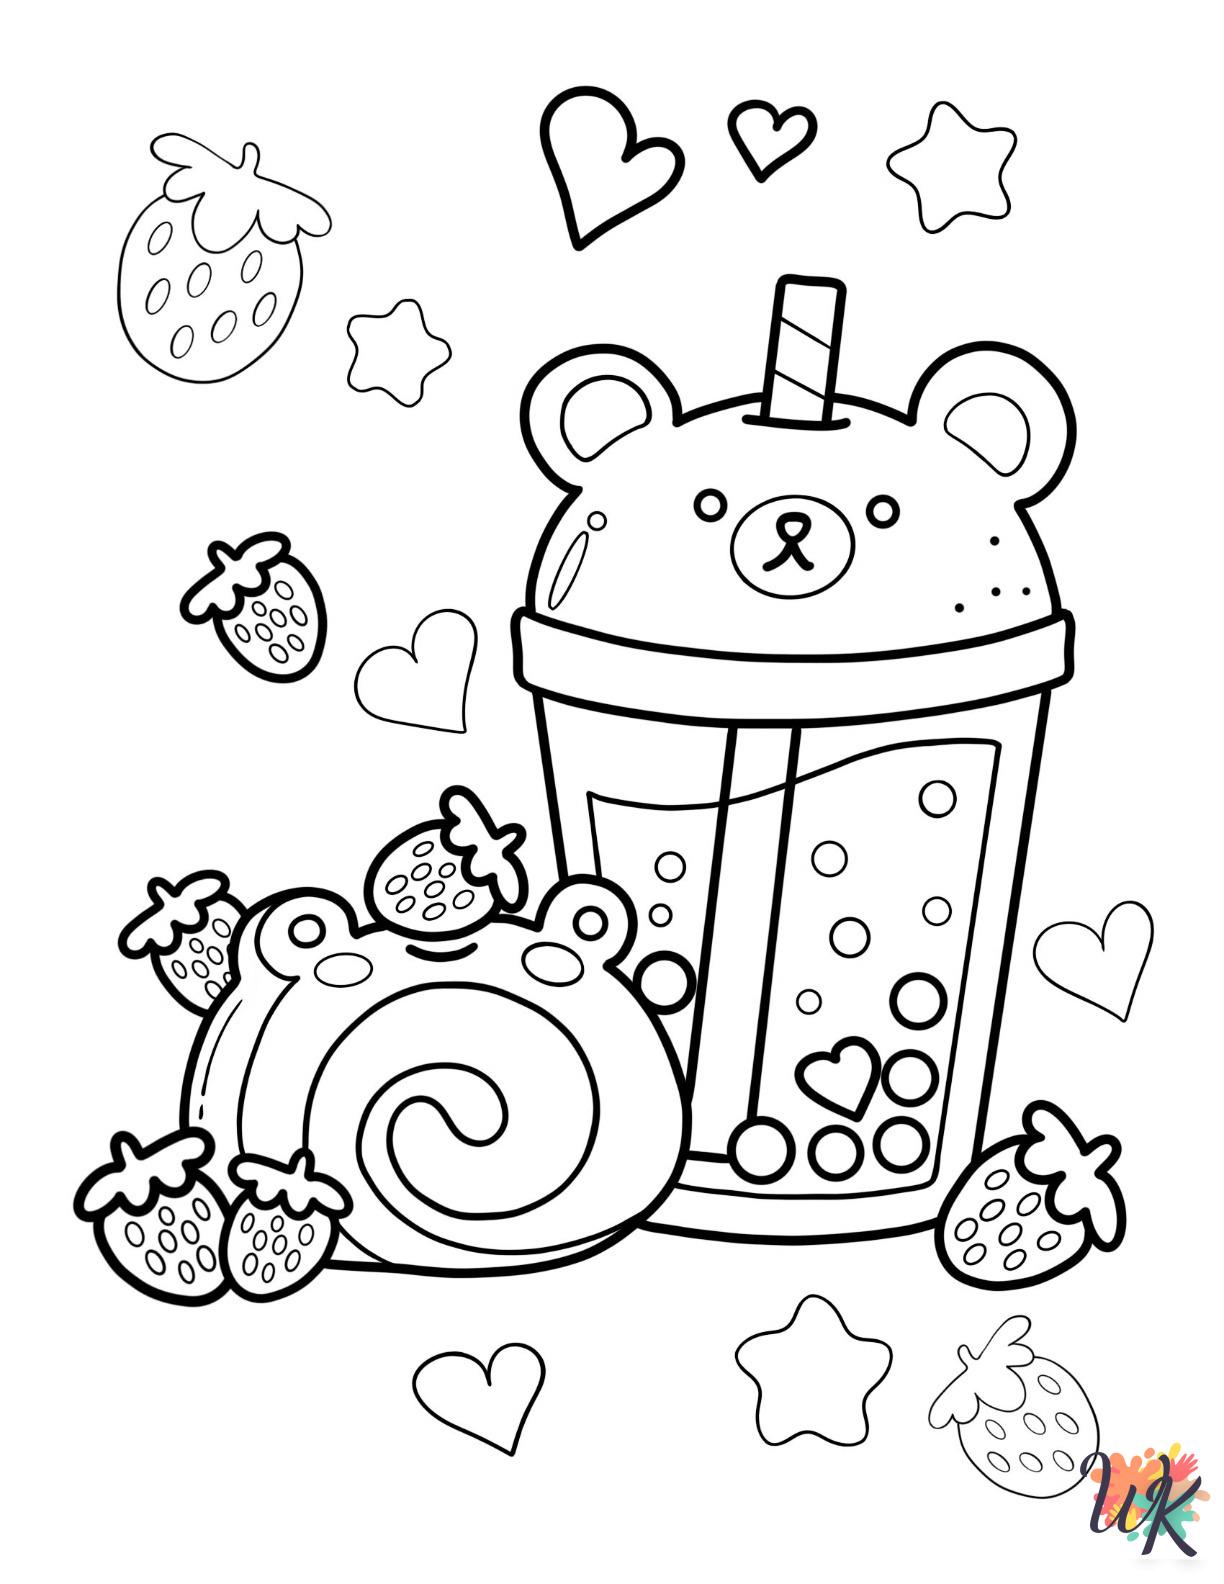 Boba Tea coloring pages easy